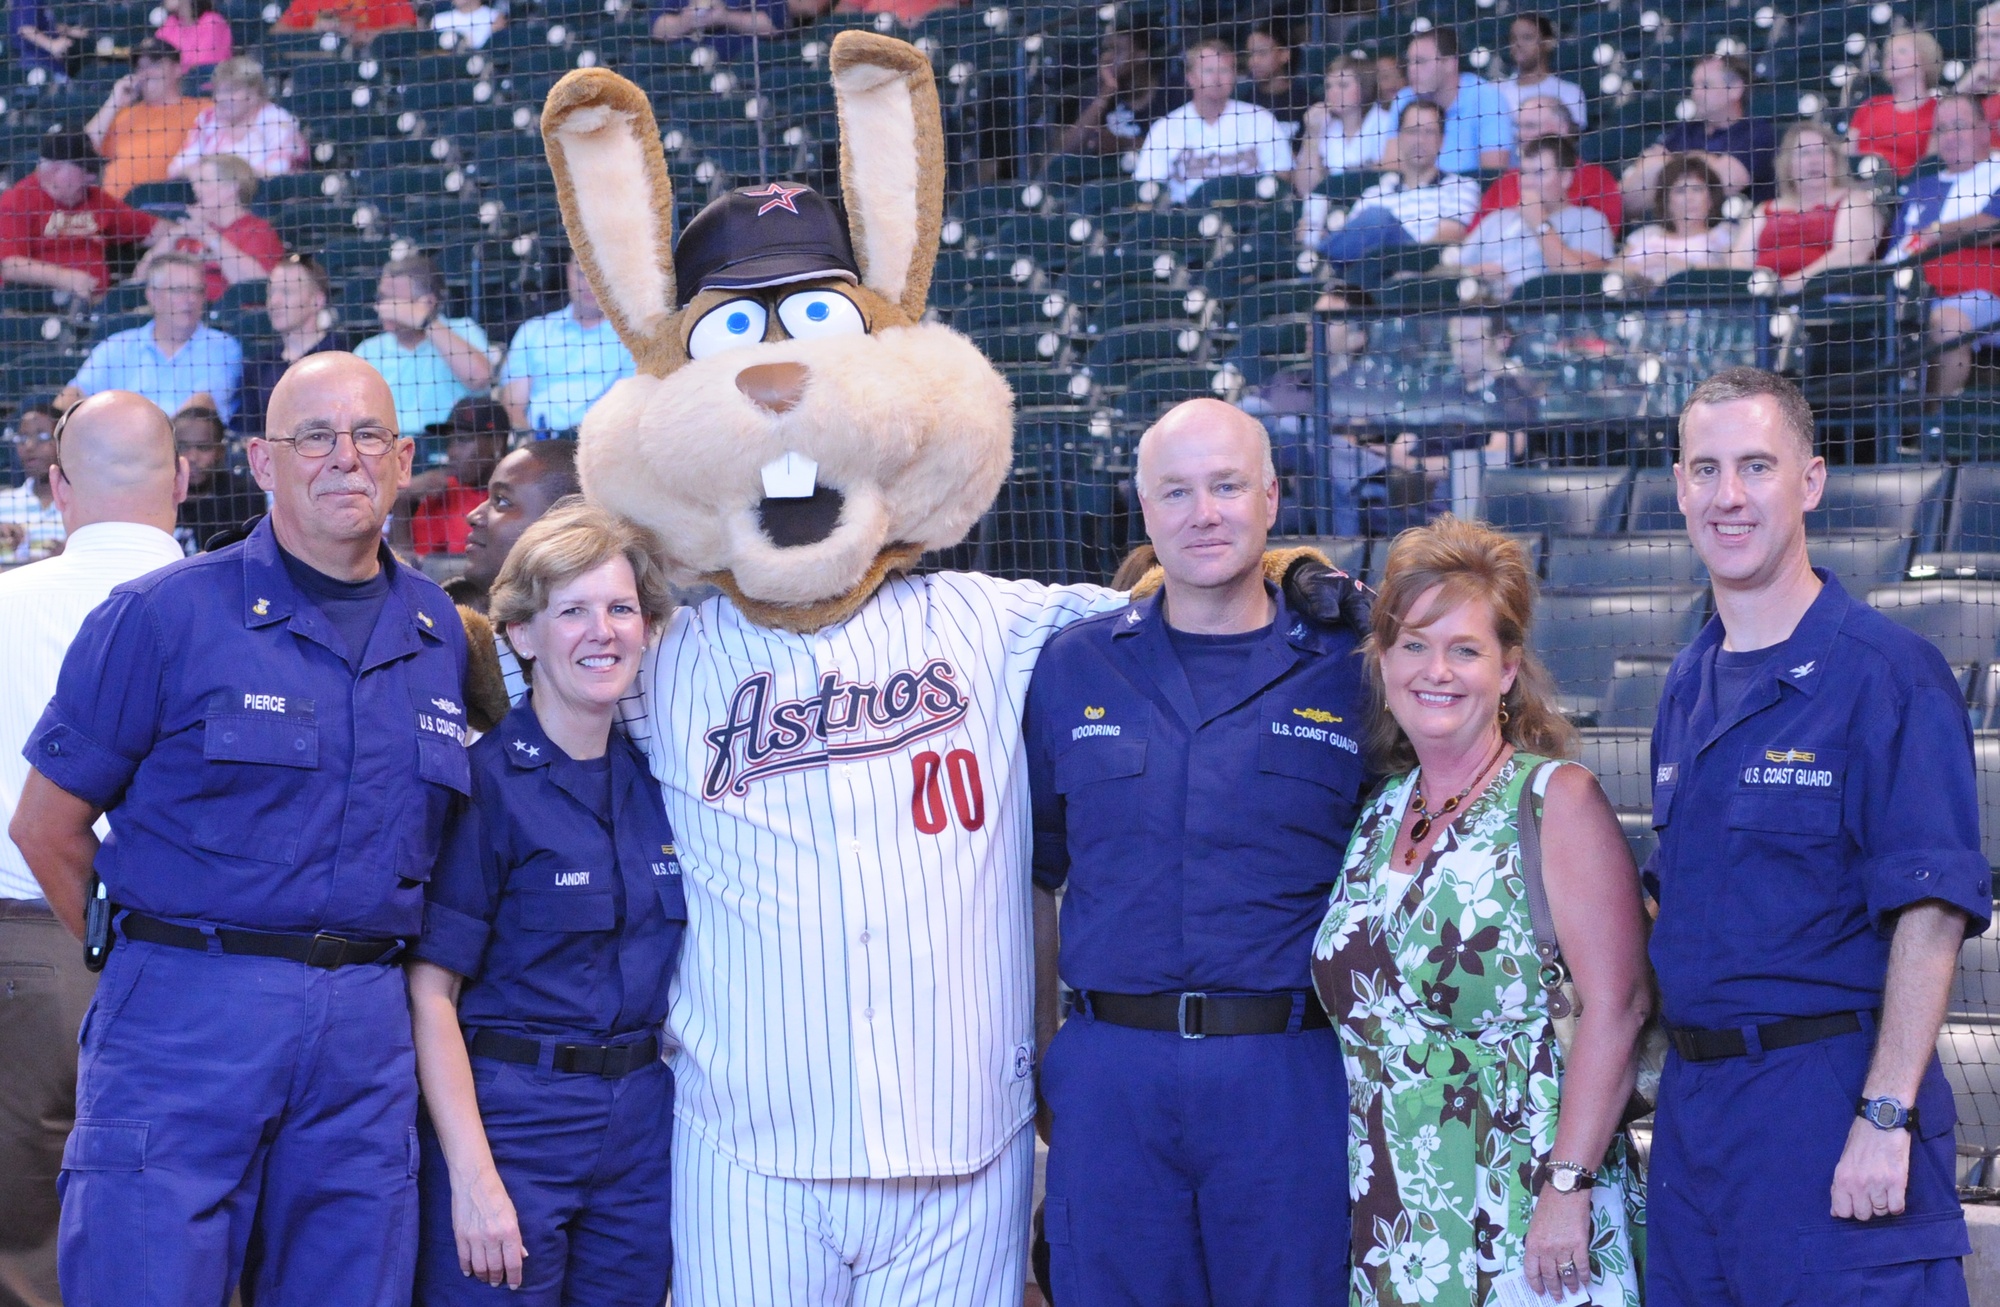 DVIDS - Images - Coast Guard Day at Houston Astros game